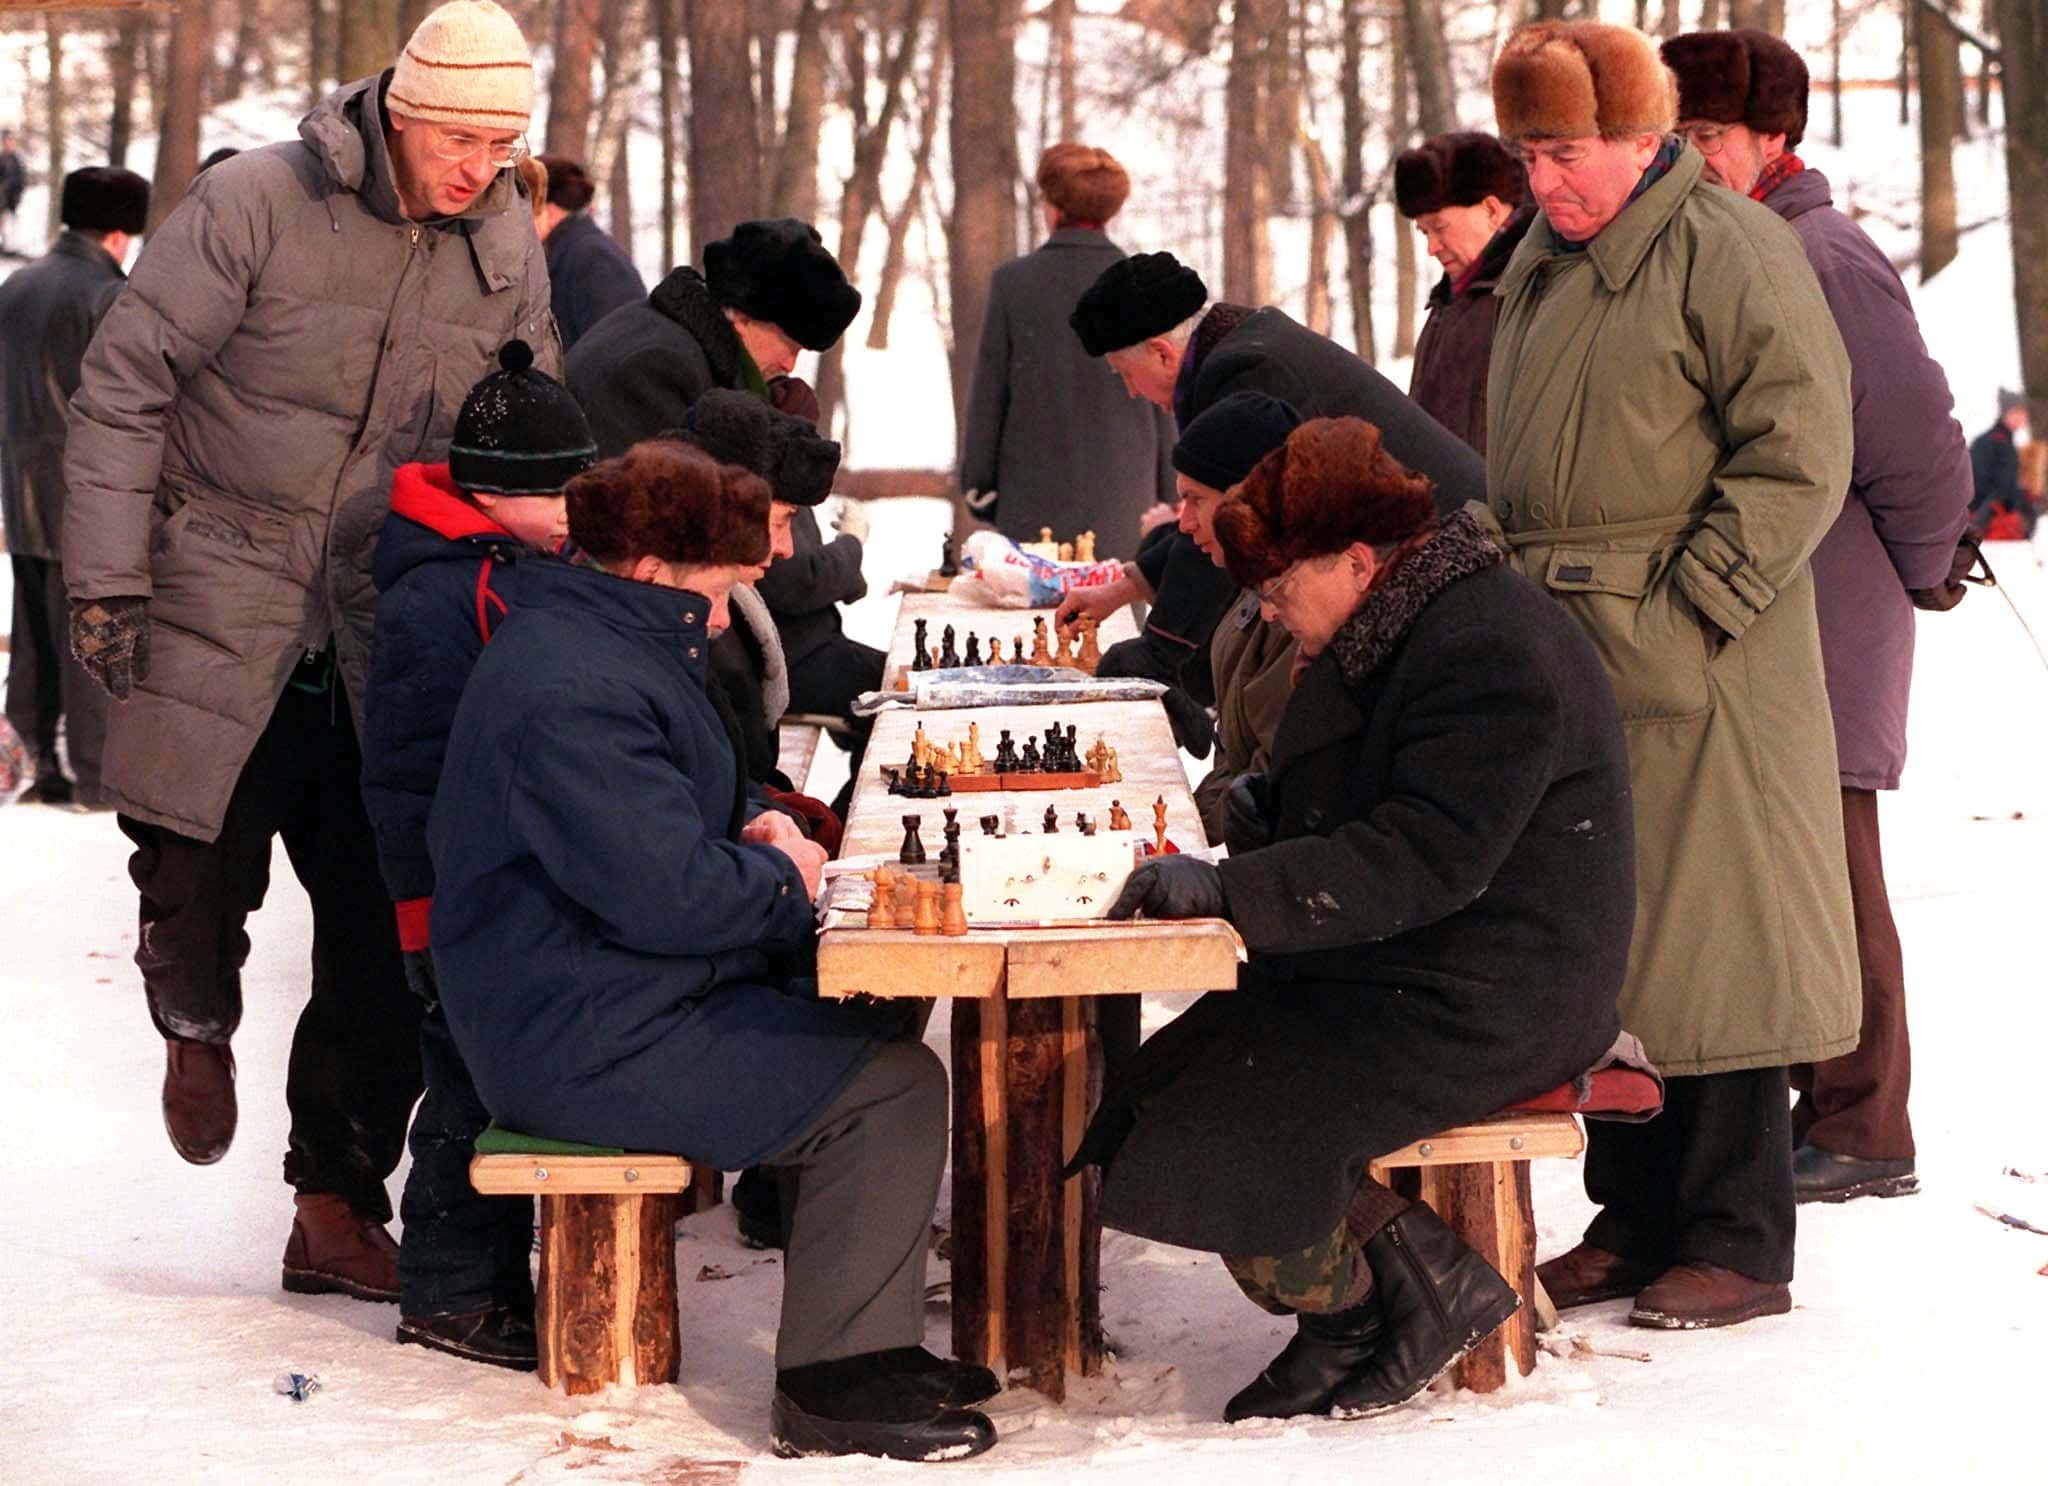 The Queen's Gambit' Created a Fictional Female Chess Grandmaster. The  Soviets Created Real Ones.